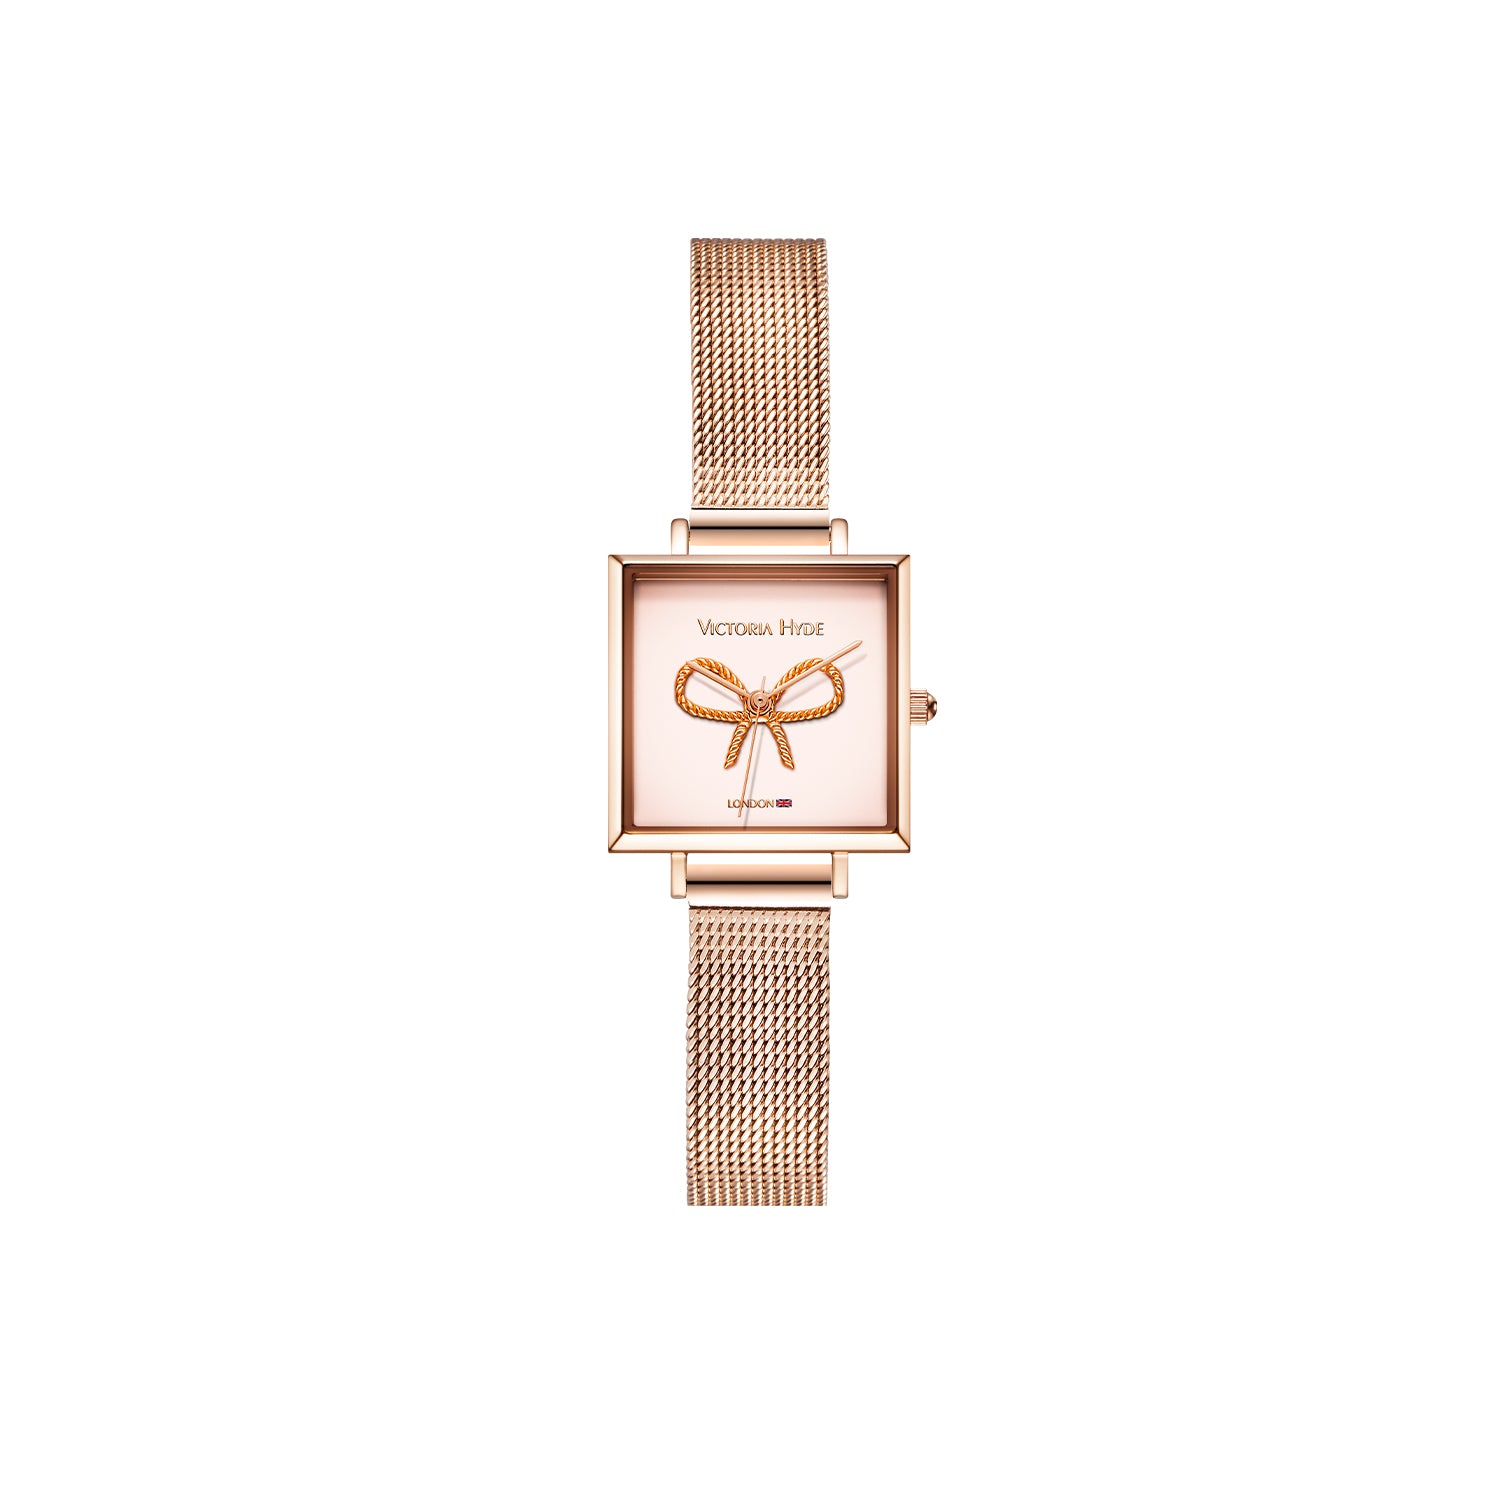 Watch Maida Vale Bow Edged in Rosegold